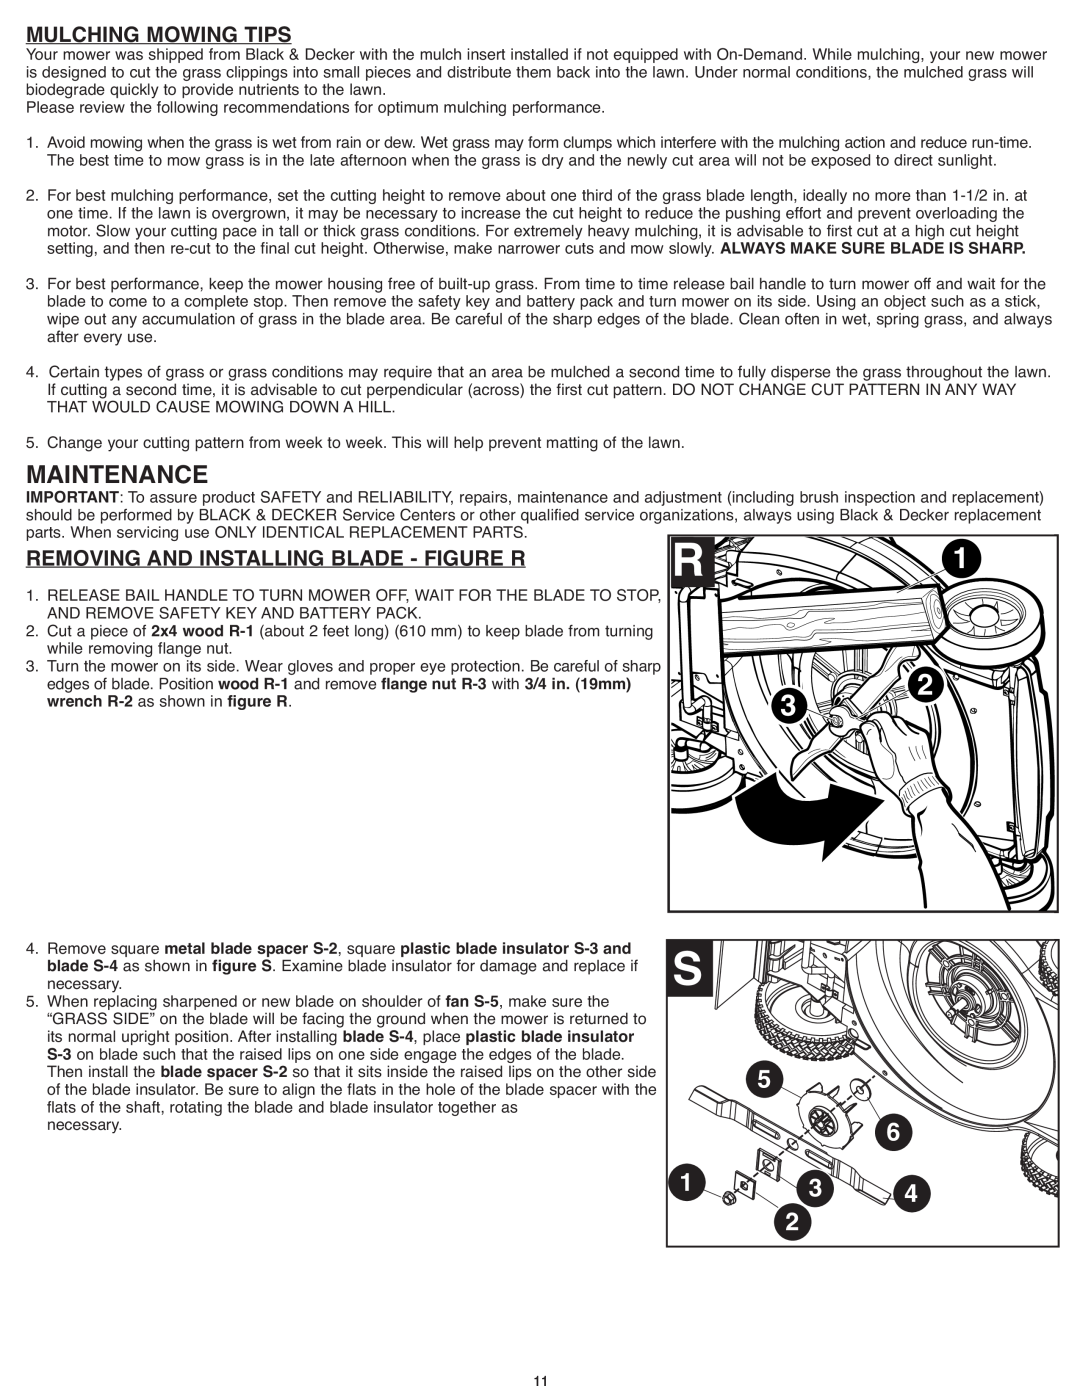 Black & Decker CM1936ZF2 instruction manual Maintenance, Mulching Mowing Tips, Removing And Installing Blade - Figure R 